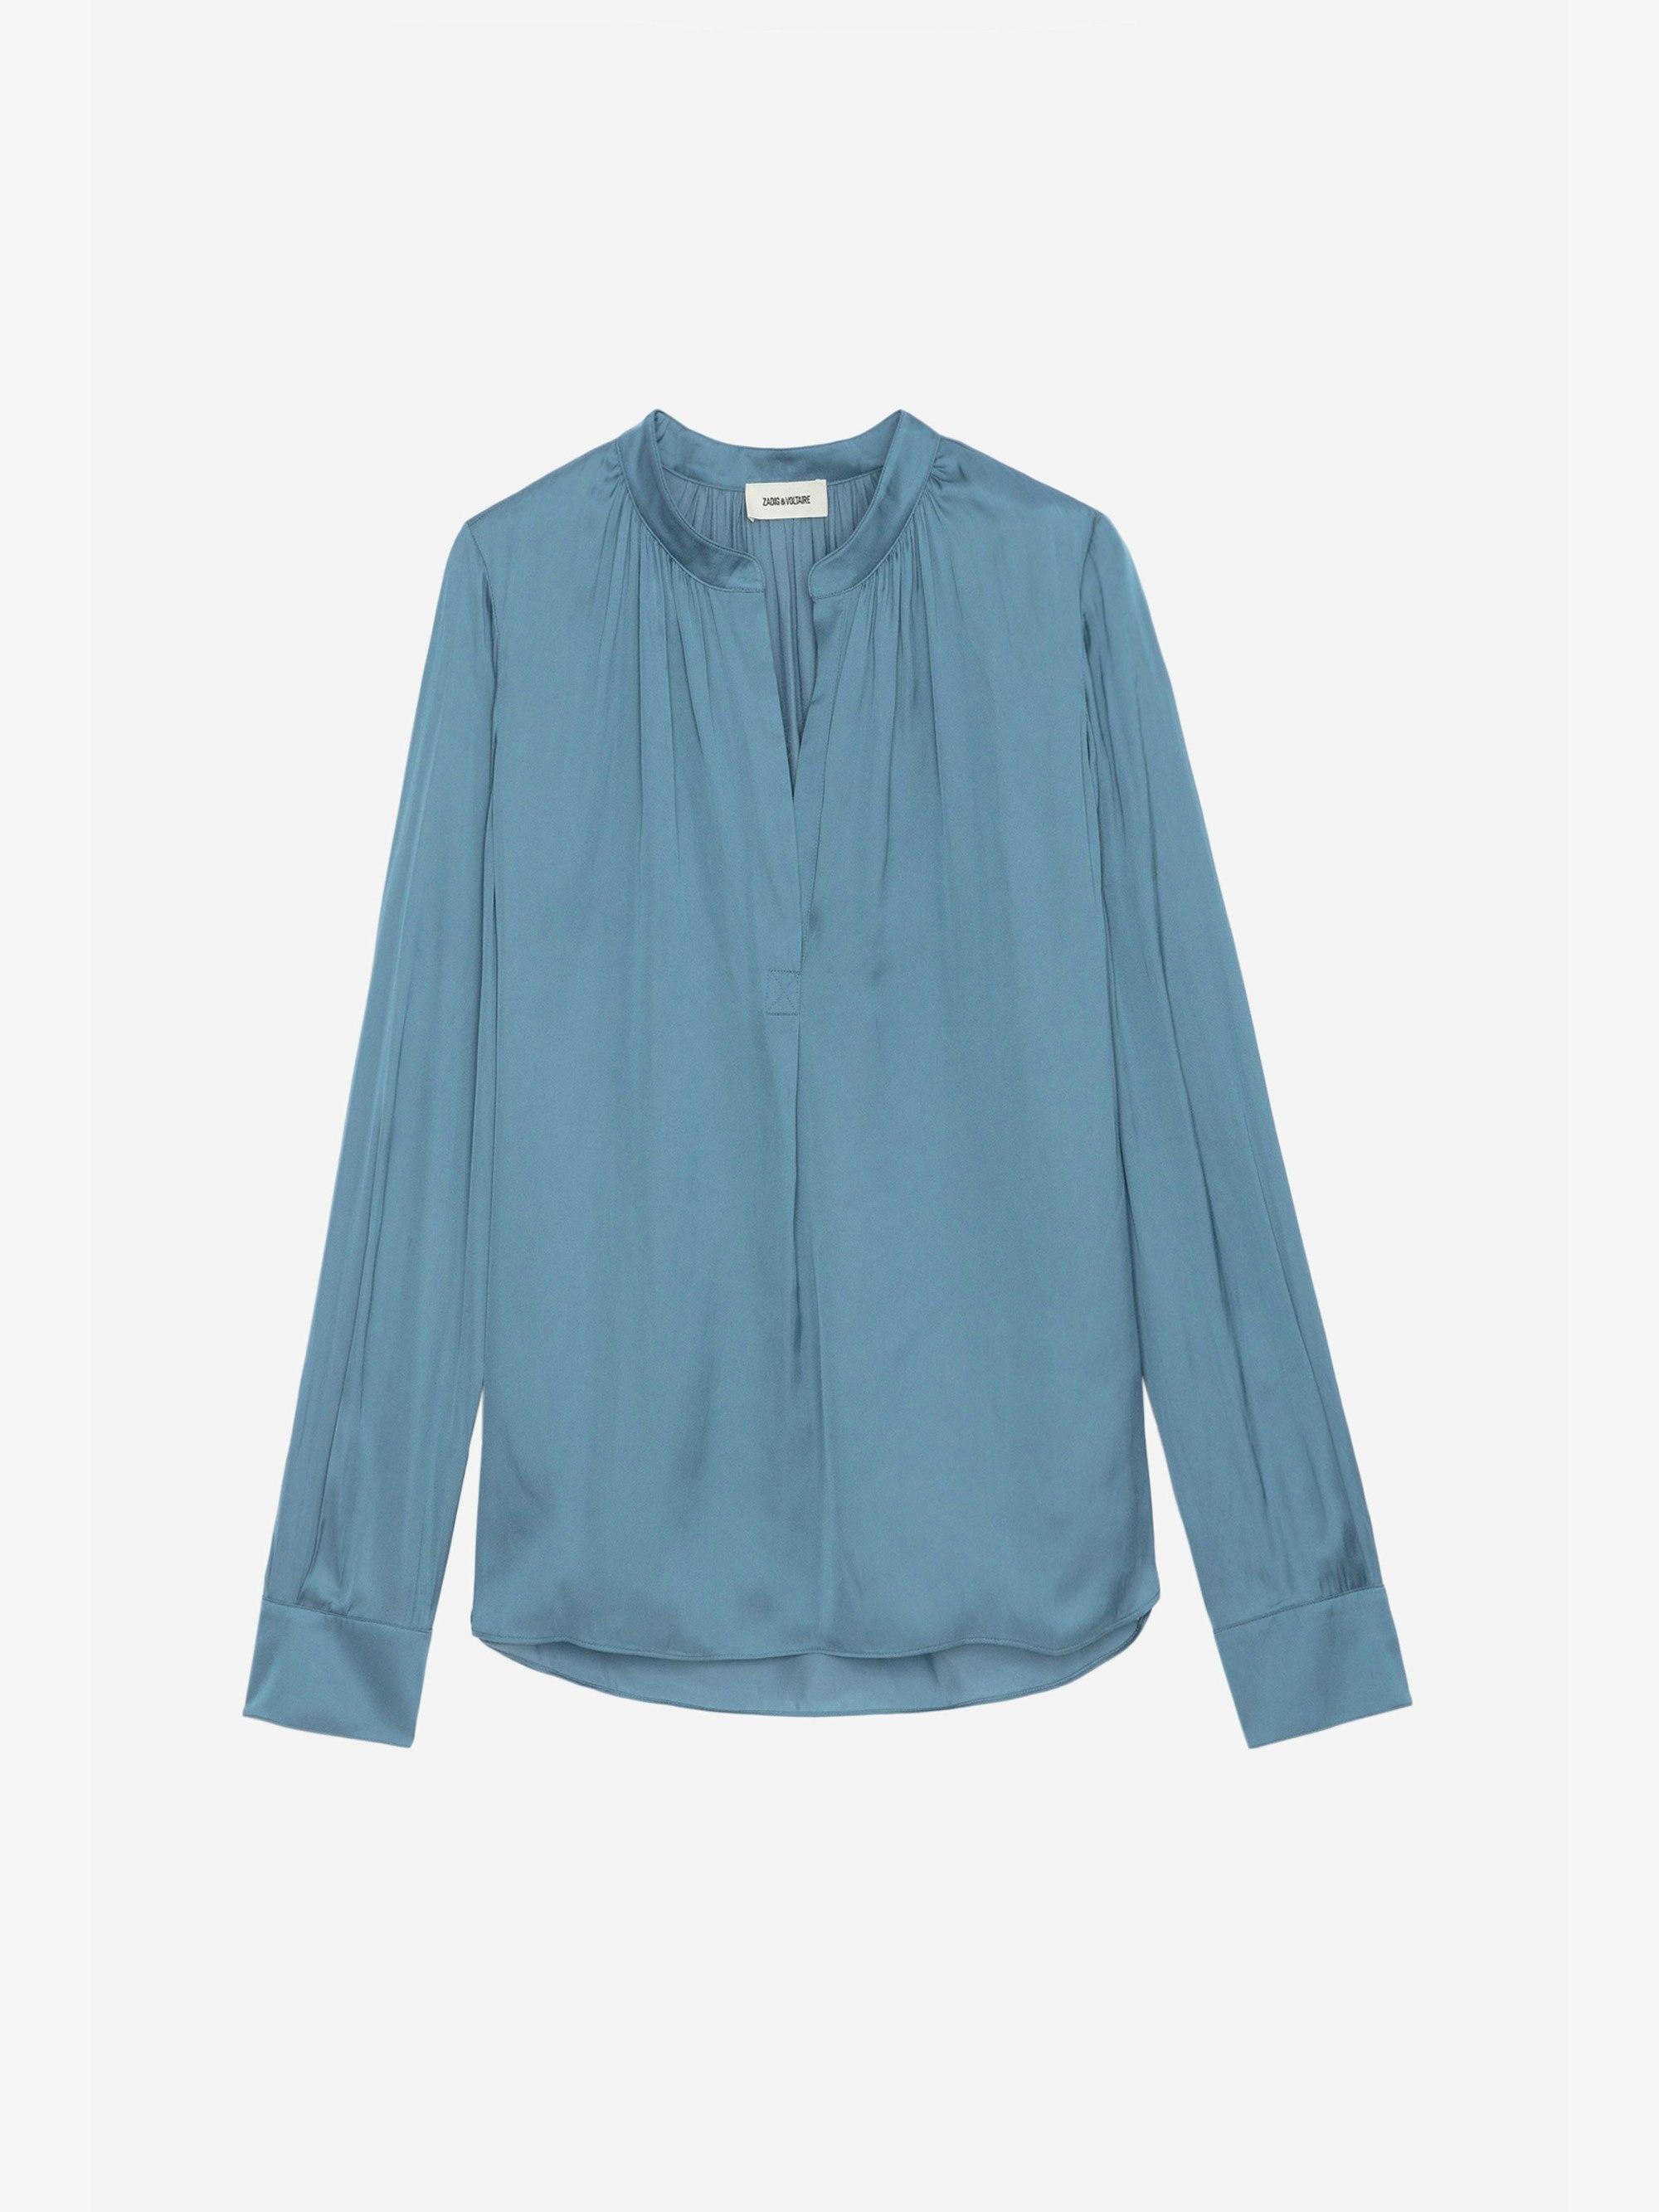 Tink Satin Blouse - Women’s sky blue blouse with open collar.